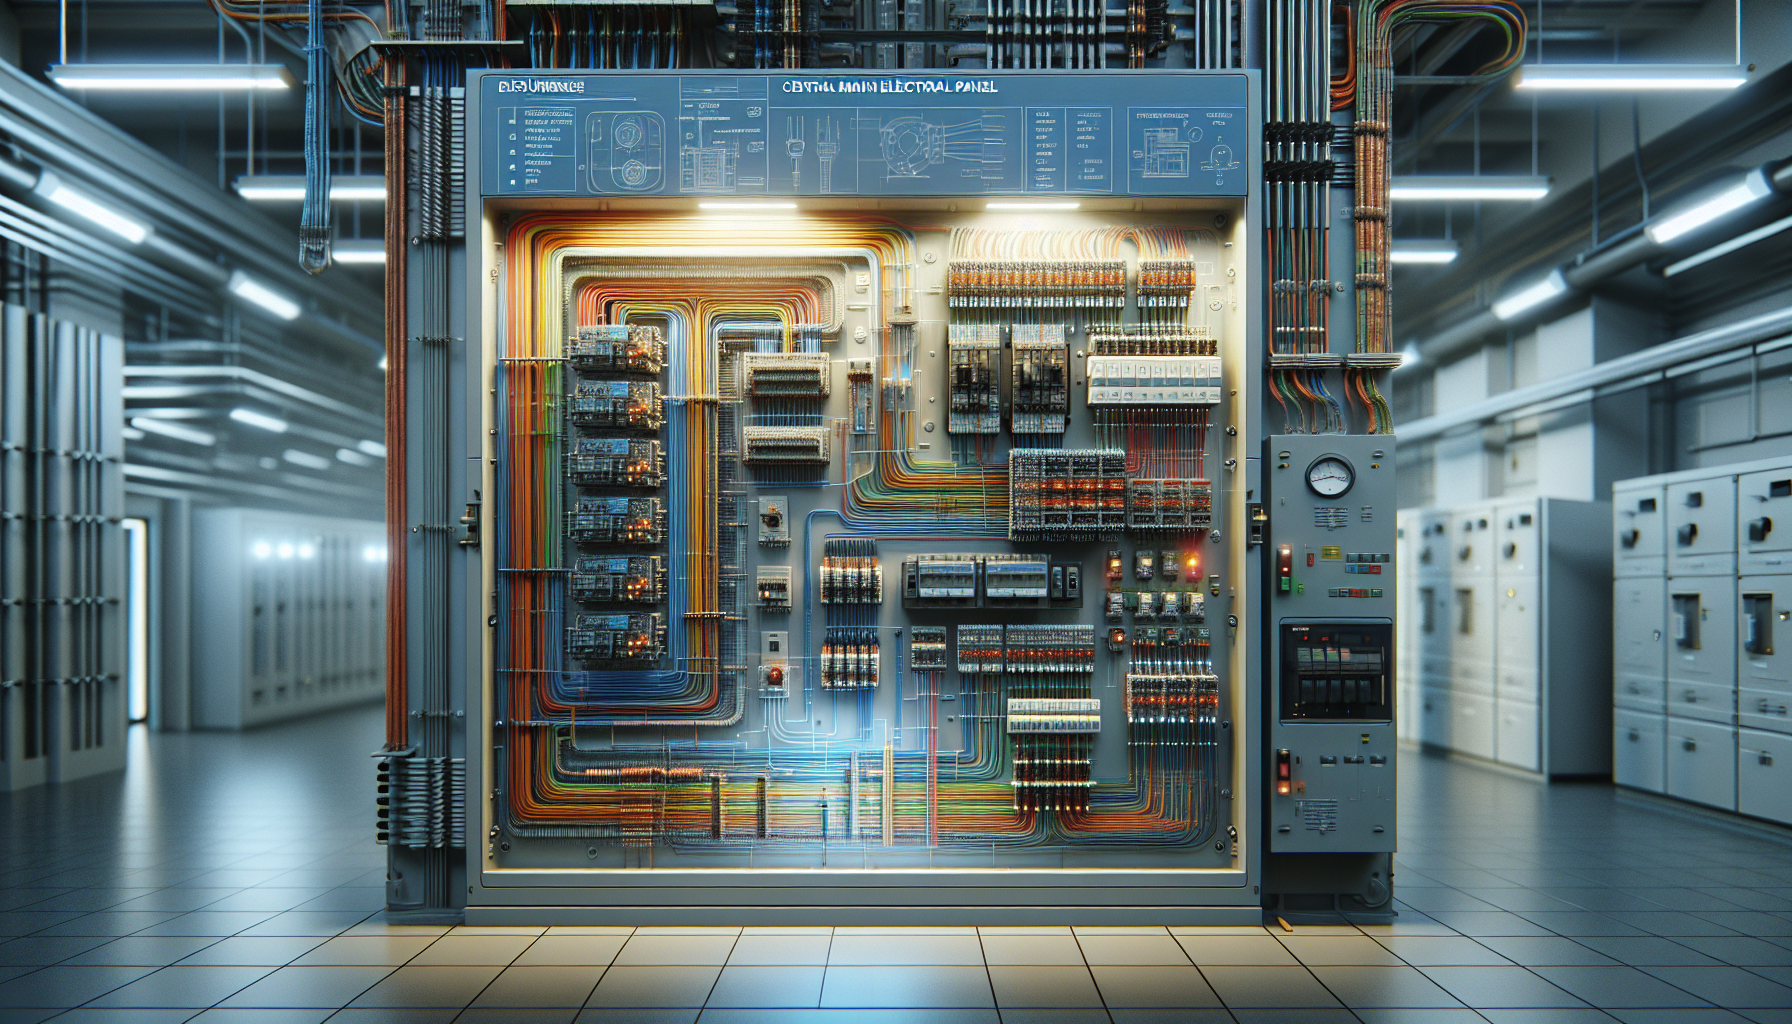 What Is Considered The Main Electrical Panel?